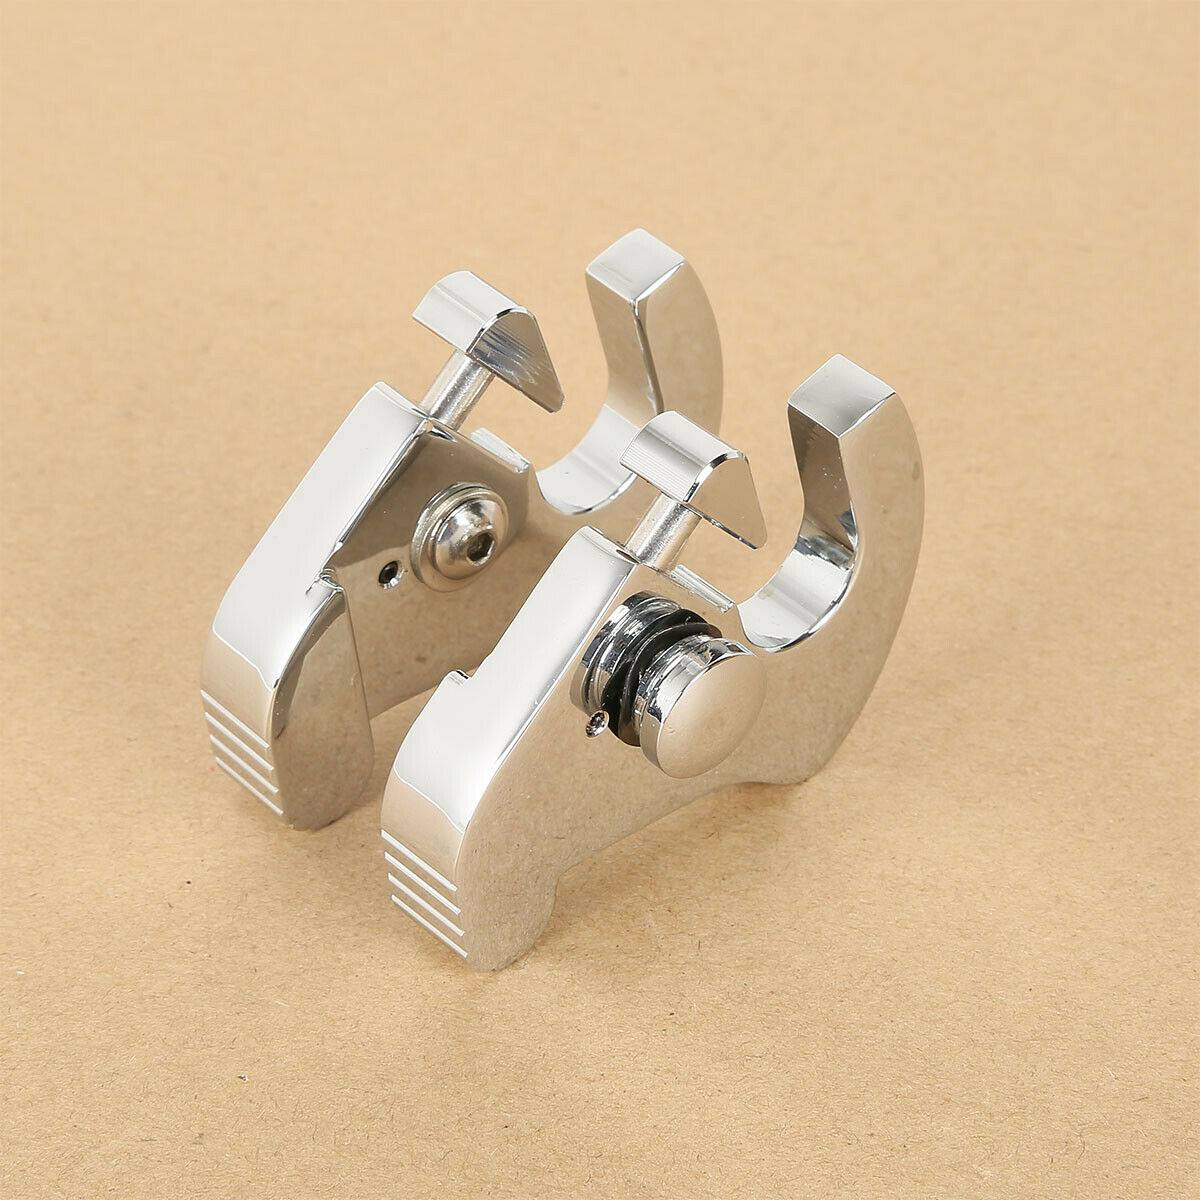 Sissy Bar Luggage Rack Latch Clip Kit Fit For Harley Touring Road King Glide US - Moto Life Products